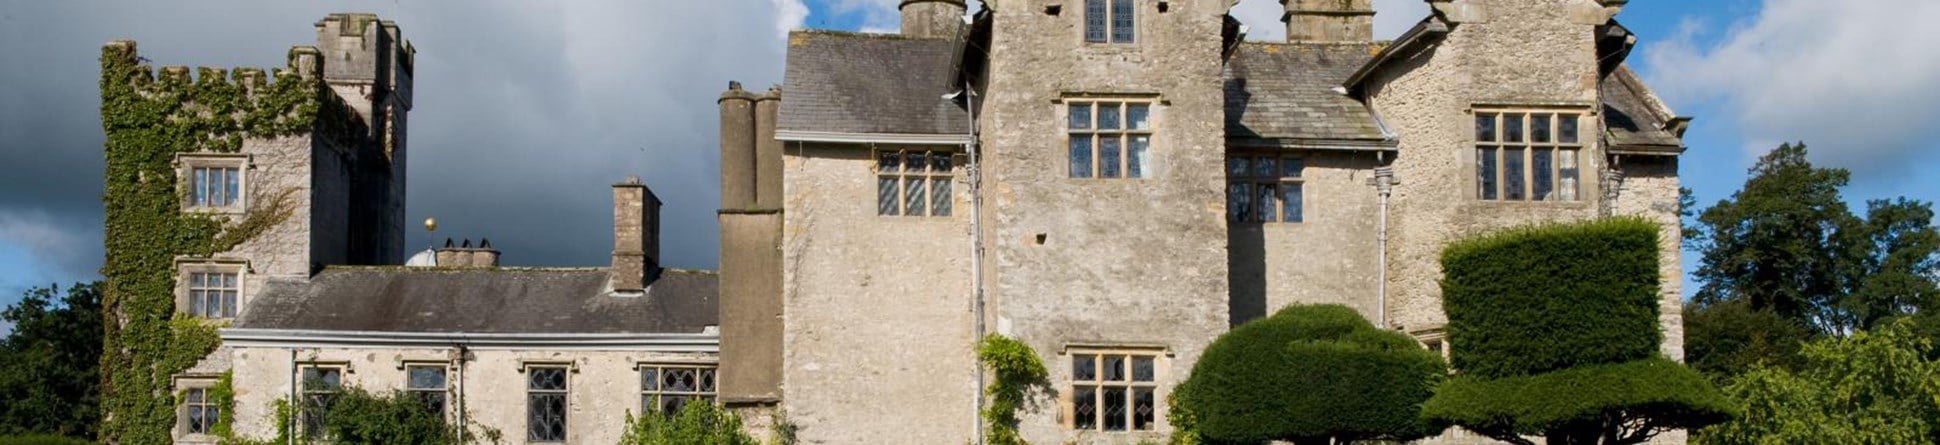 Photo of the outside of Levens Hall, a 16th century country house